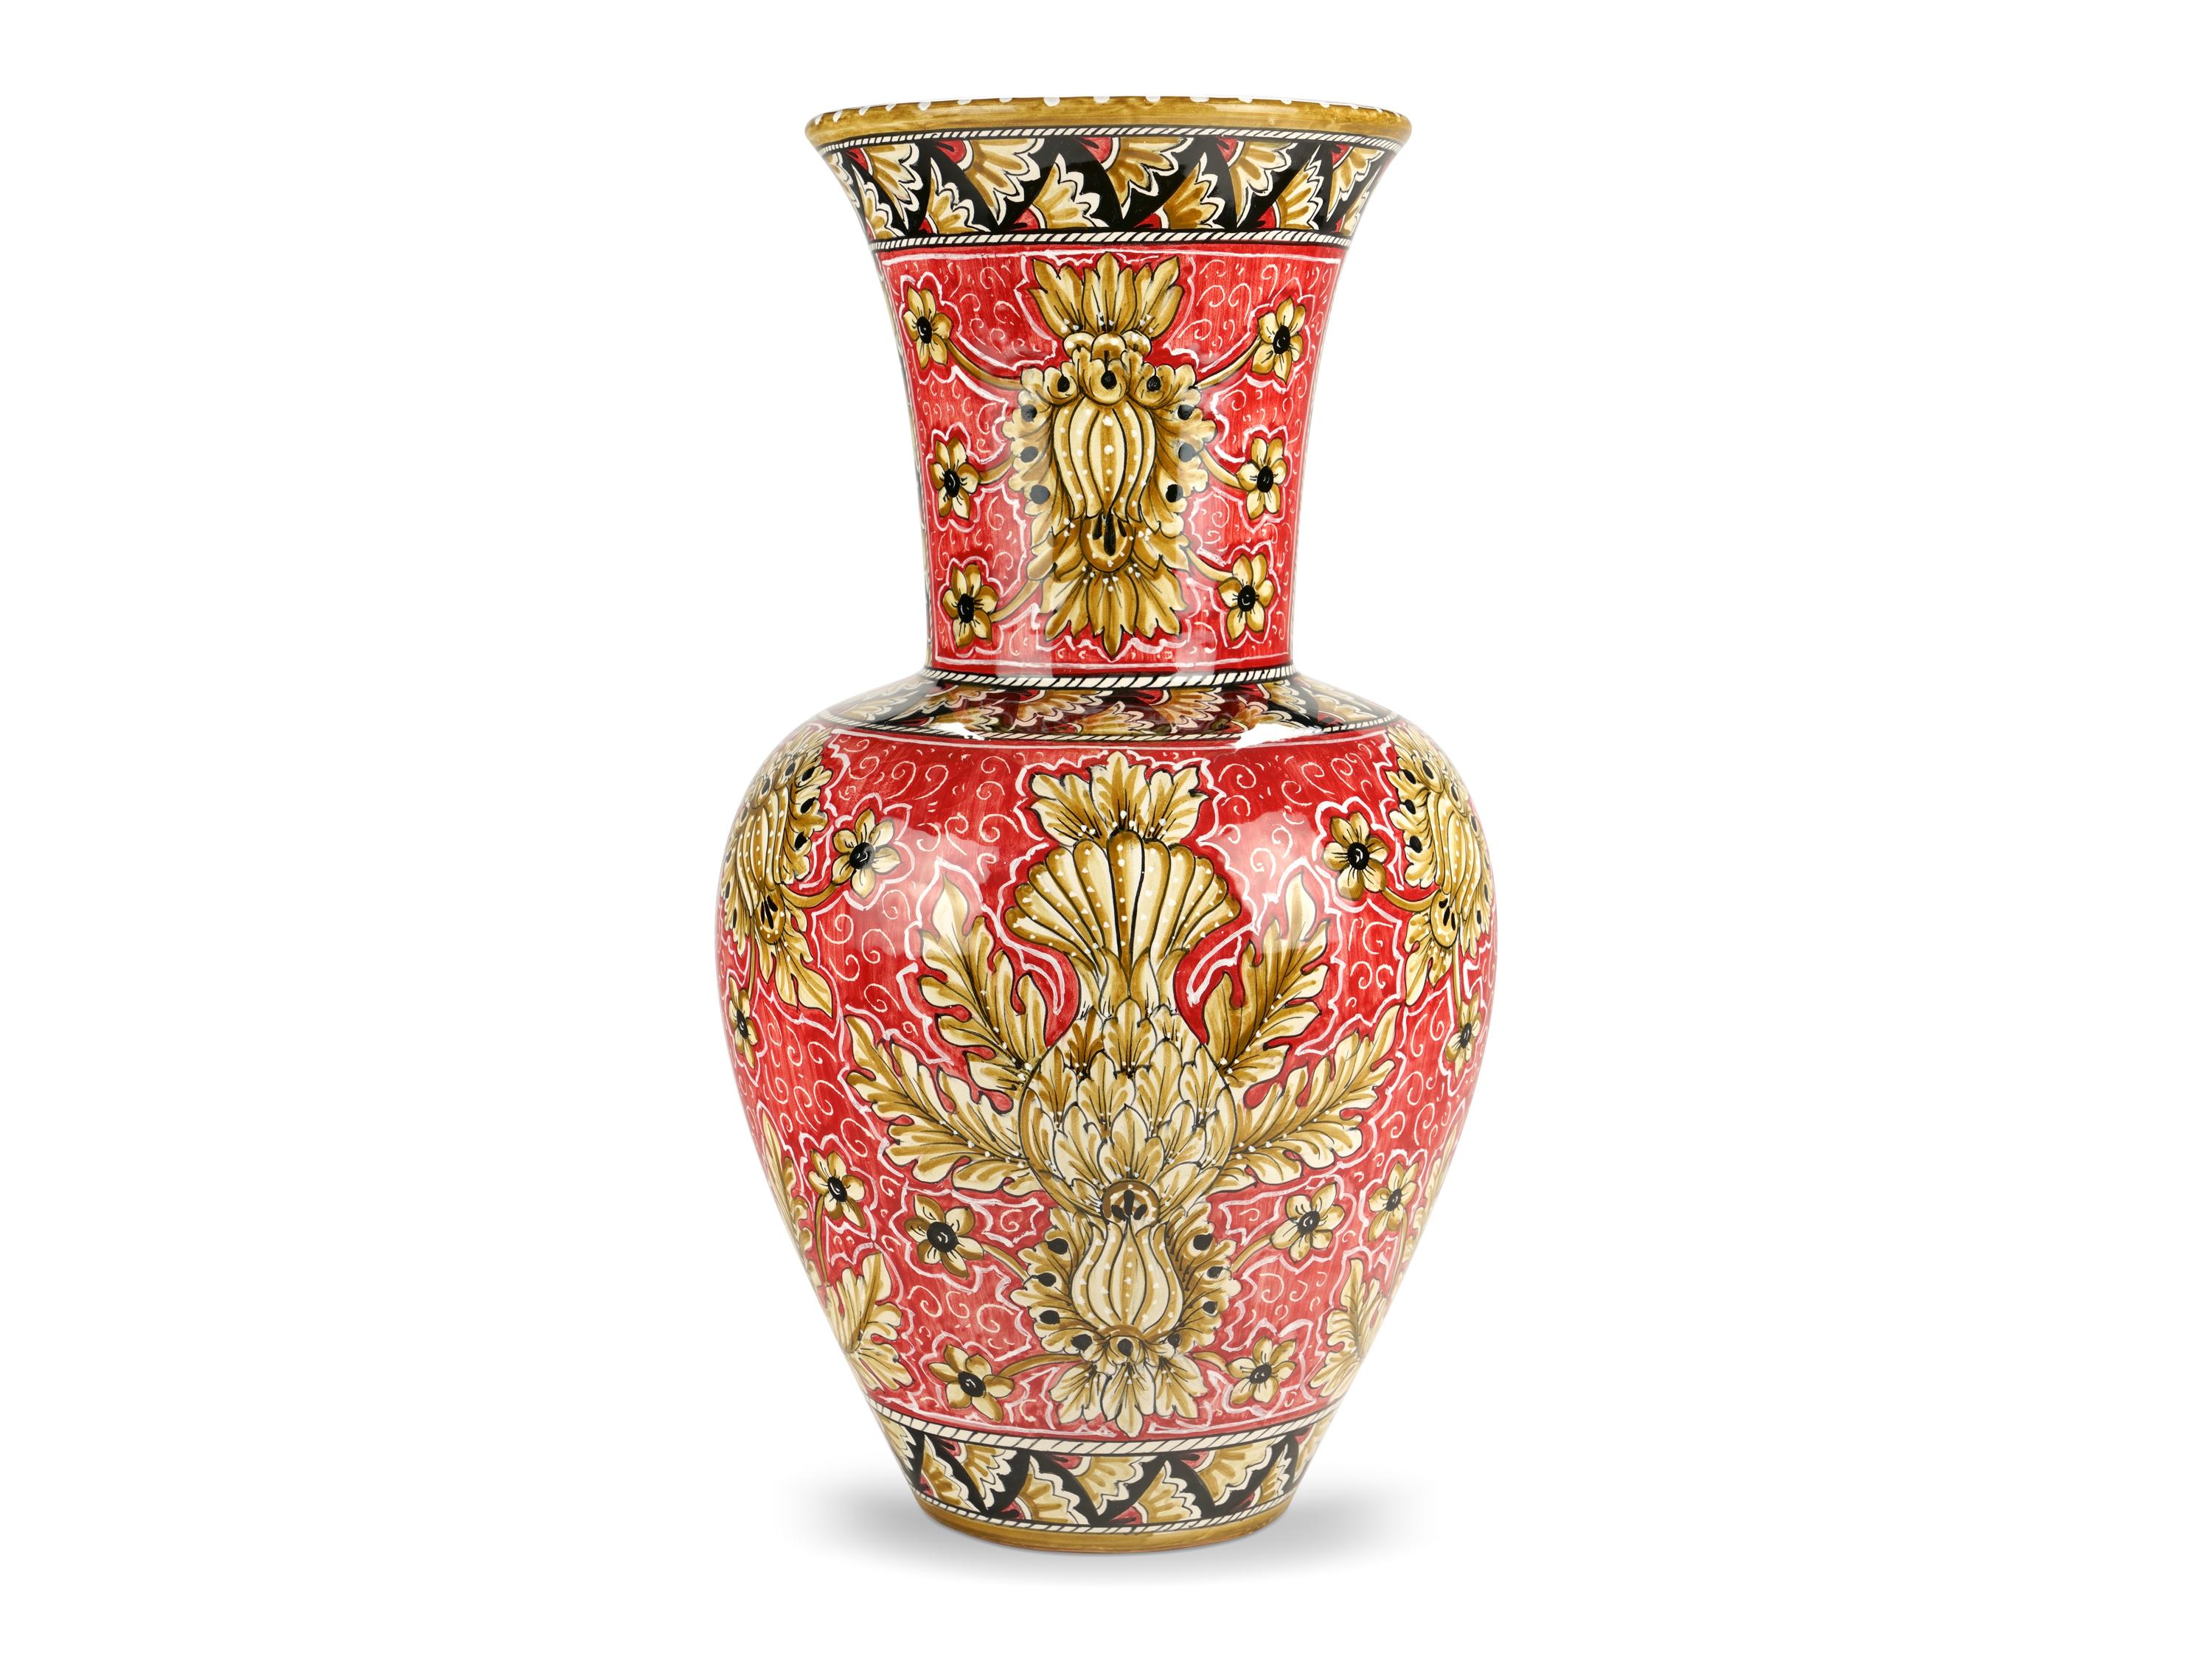 This lavish majolica vase is painted in polychrome, characterized by the elegant presence of naturalistic ornamental motifs that enhance its forms beautifully. Its powerful aesthetic impact is ensured by the slender neck and by the hand-painted